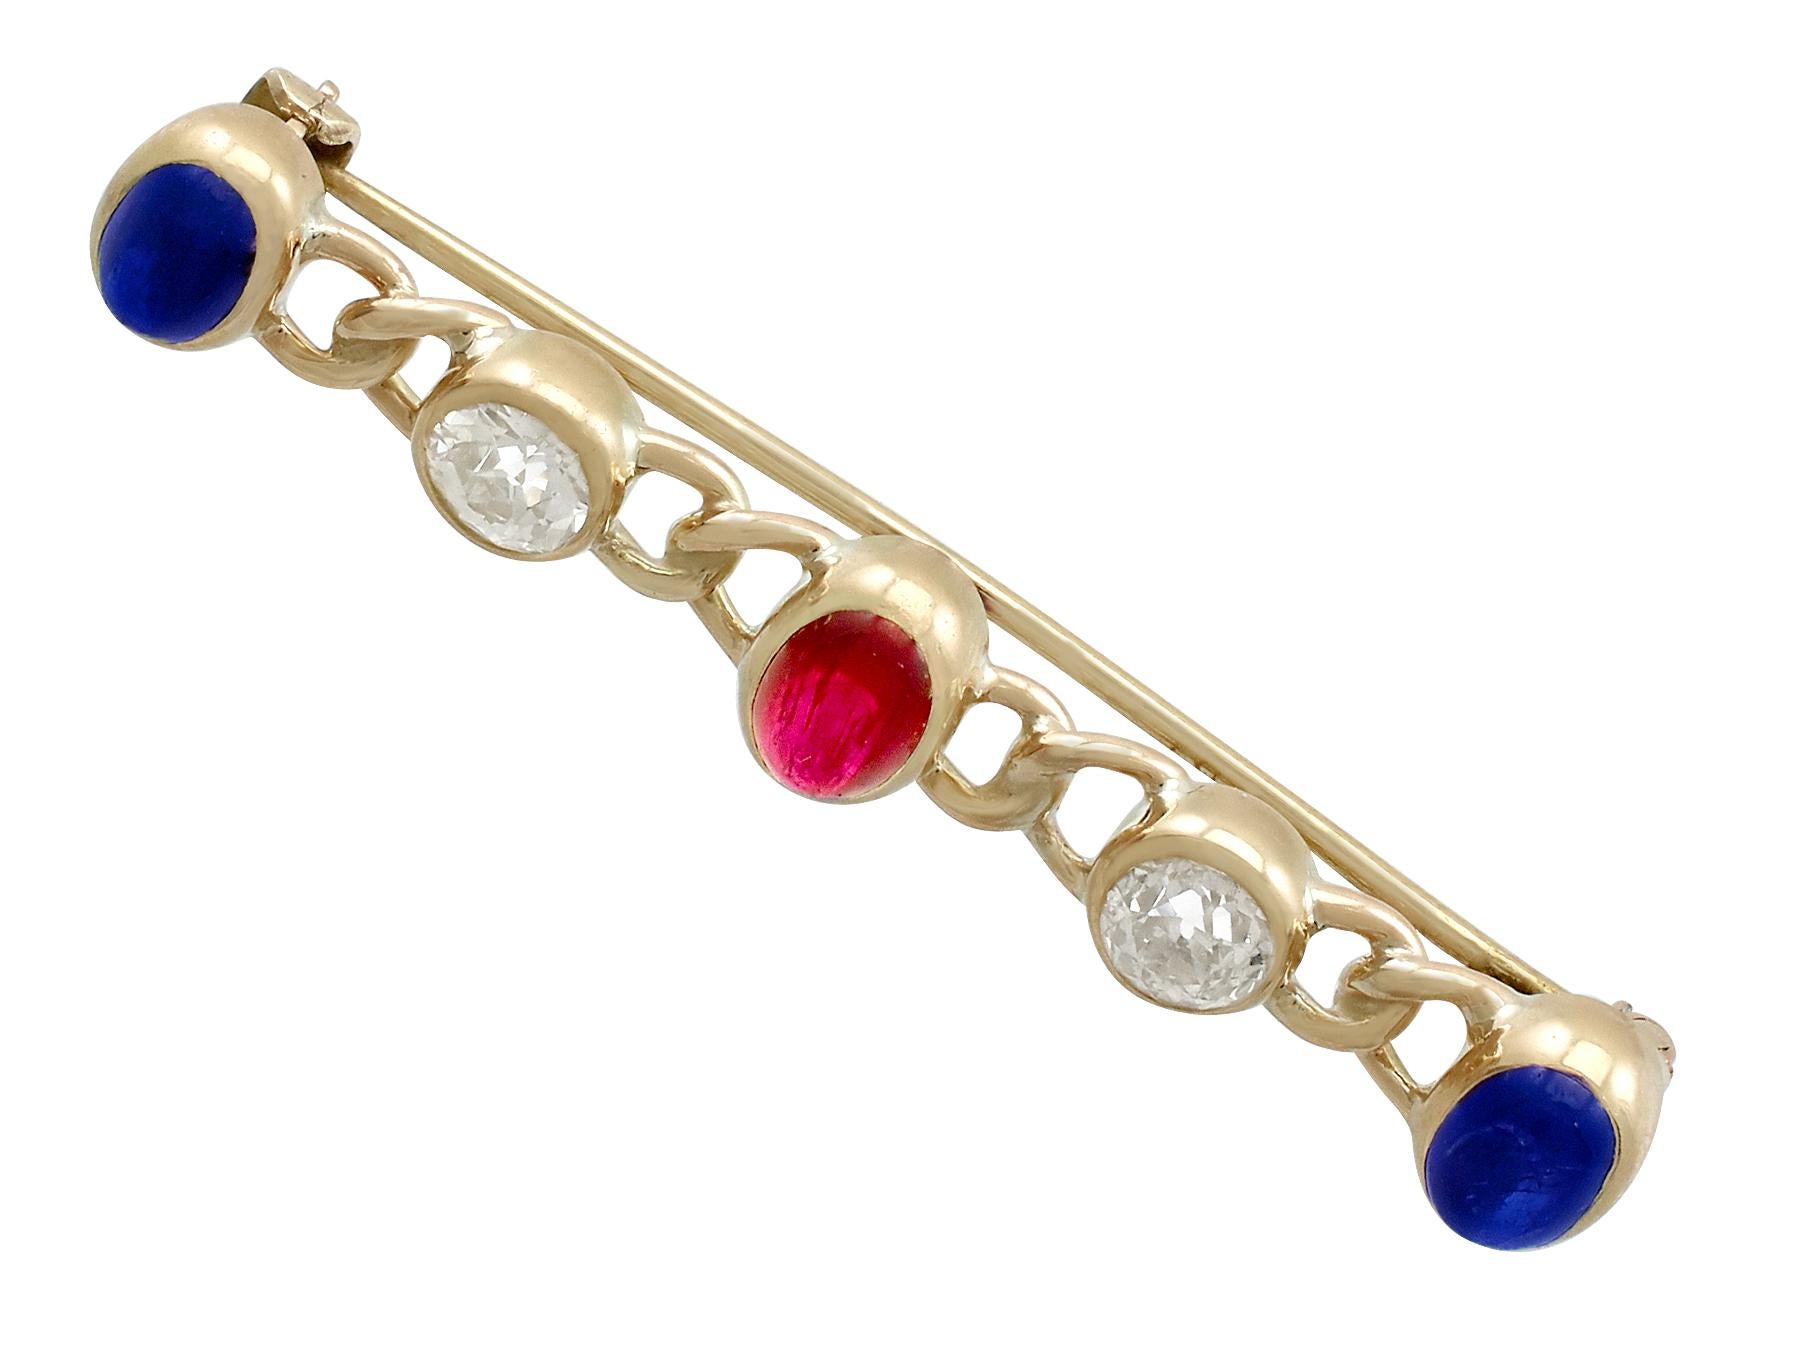 An impressive antique 0.73 carat diamond and 1.65 carat sapphire, 0.88 carat ruby and 15k yellow gold bar brooch; part of our diverse antique jewelry collections.

his fine and impressive Victorian gemstone brooch has been crafted in 15k yellow